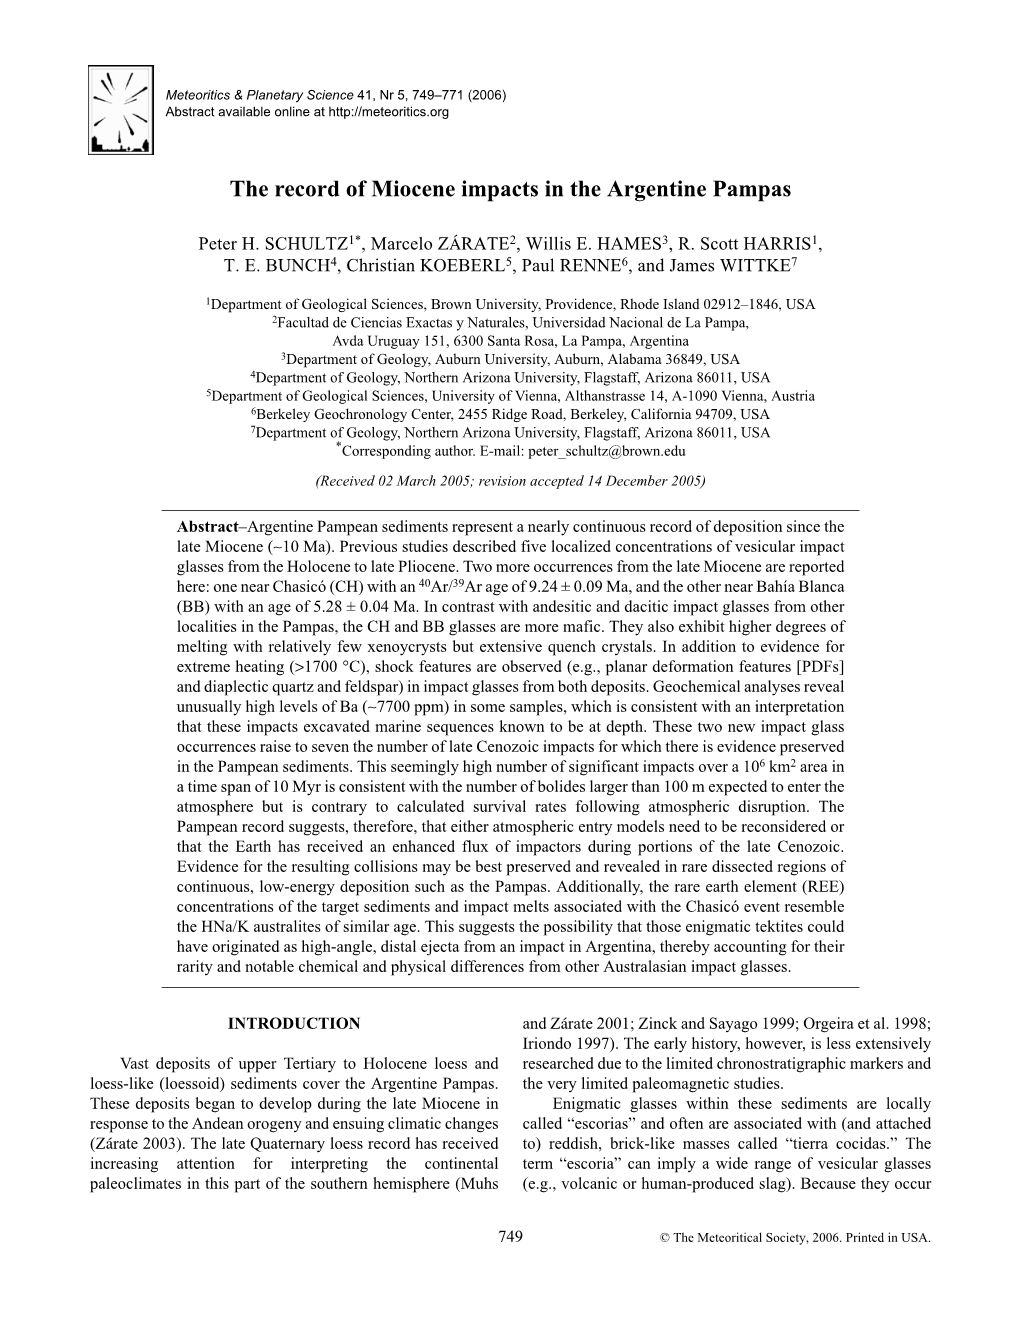 The Record of Miocene Impacts in the Argentine Pampas